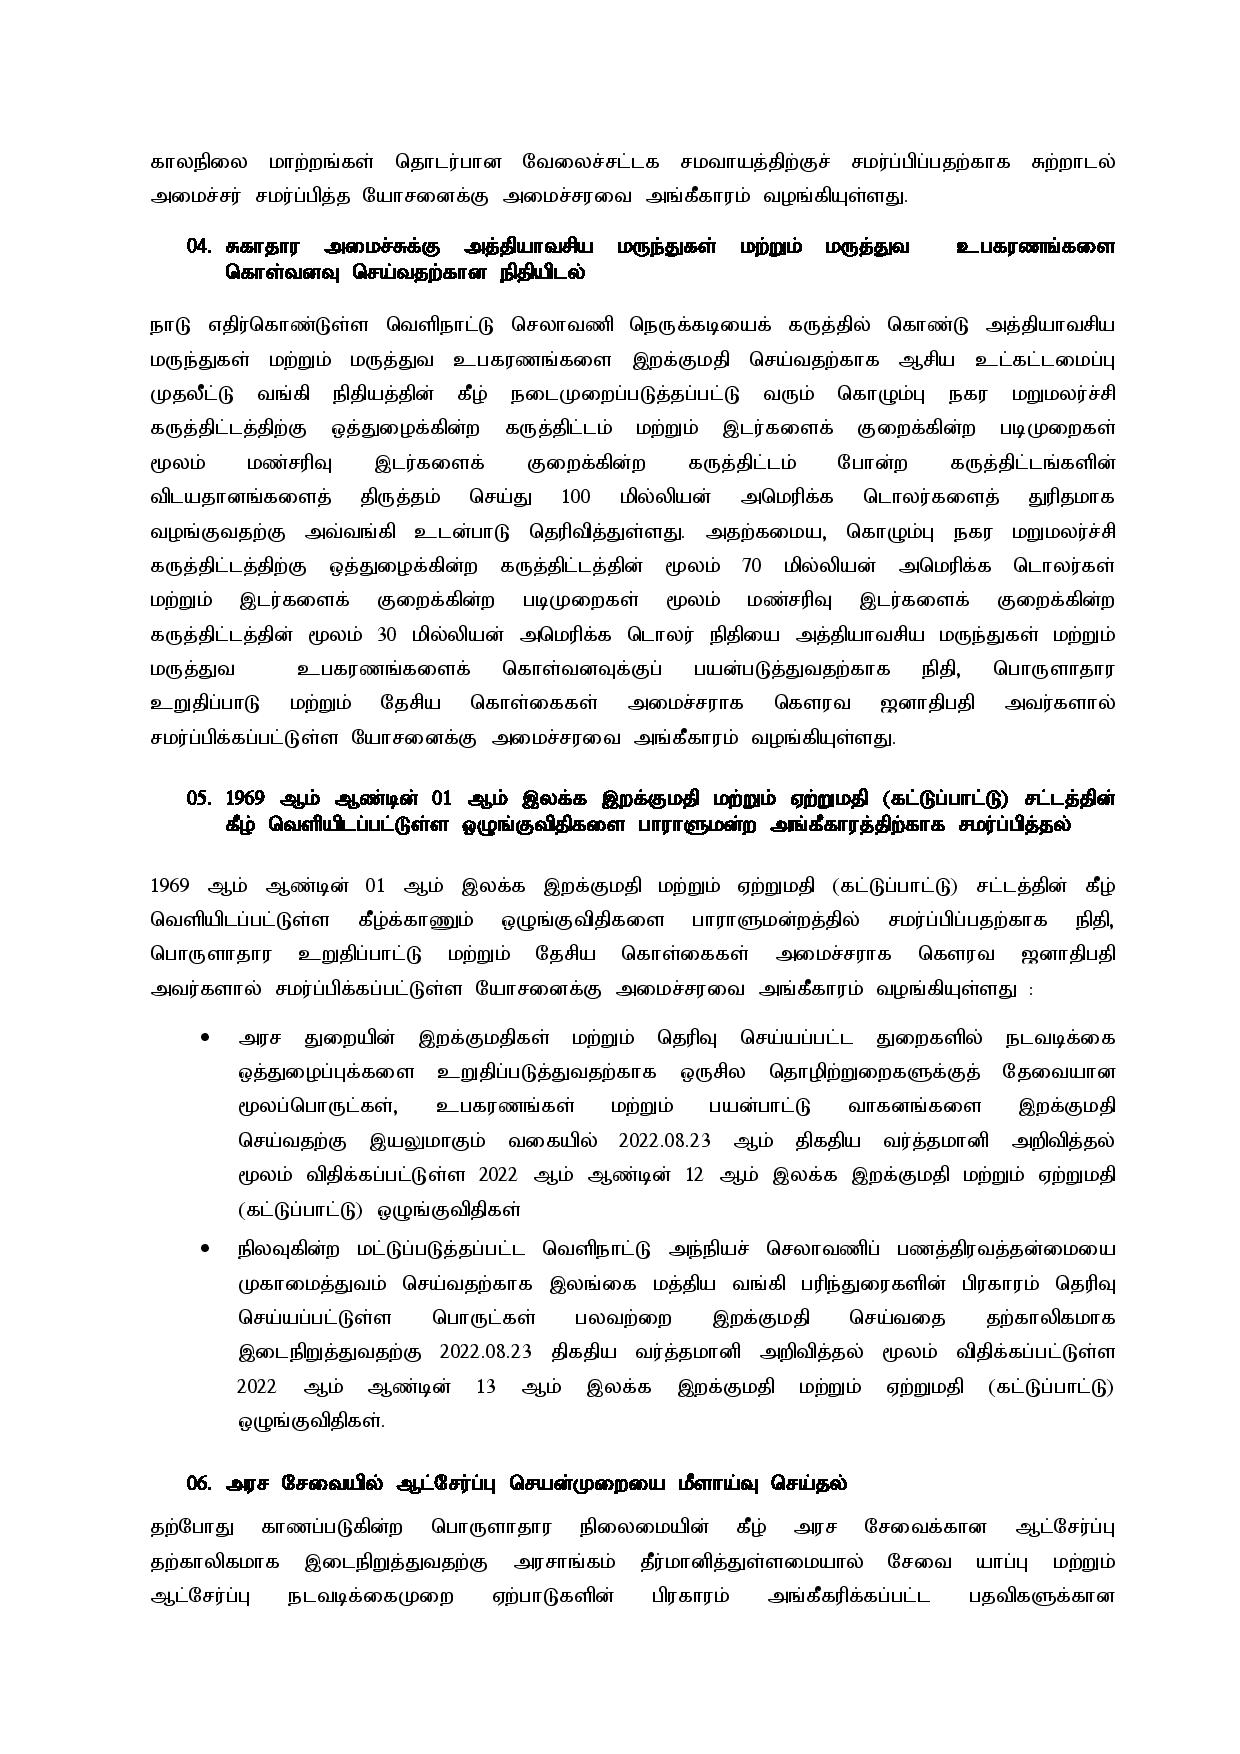 Cabinet Decisions on 12.09.2022 Tamil page 002